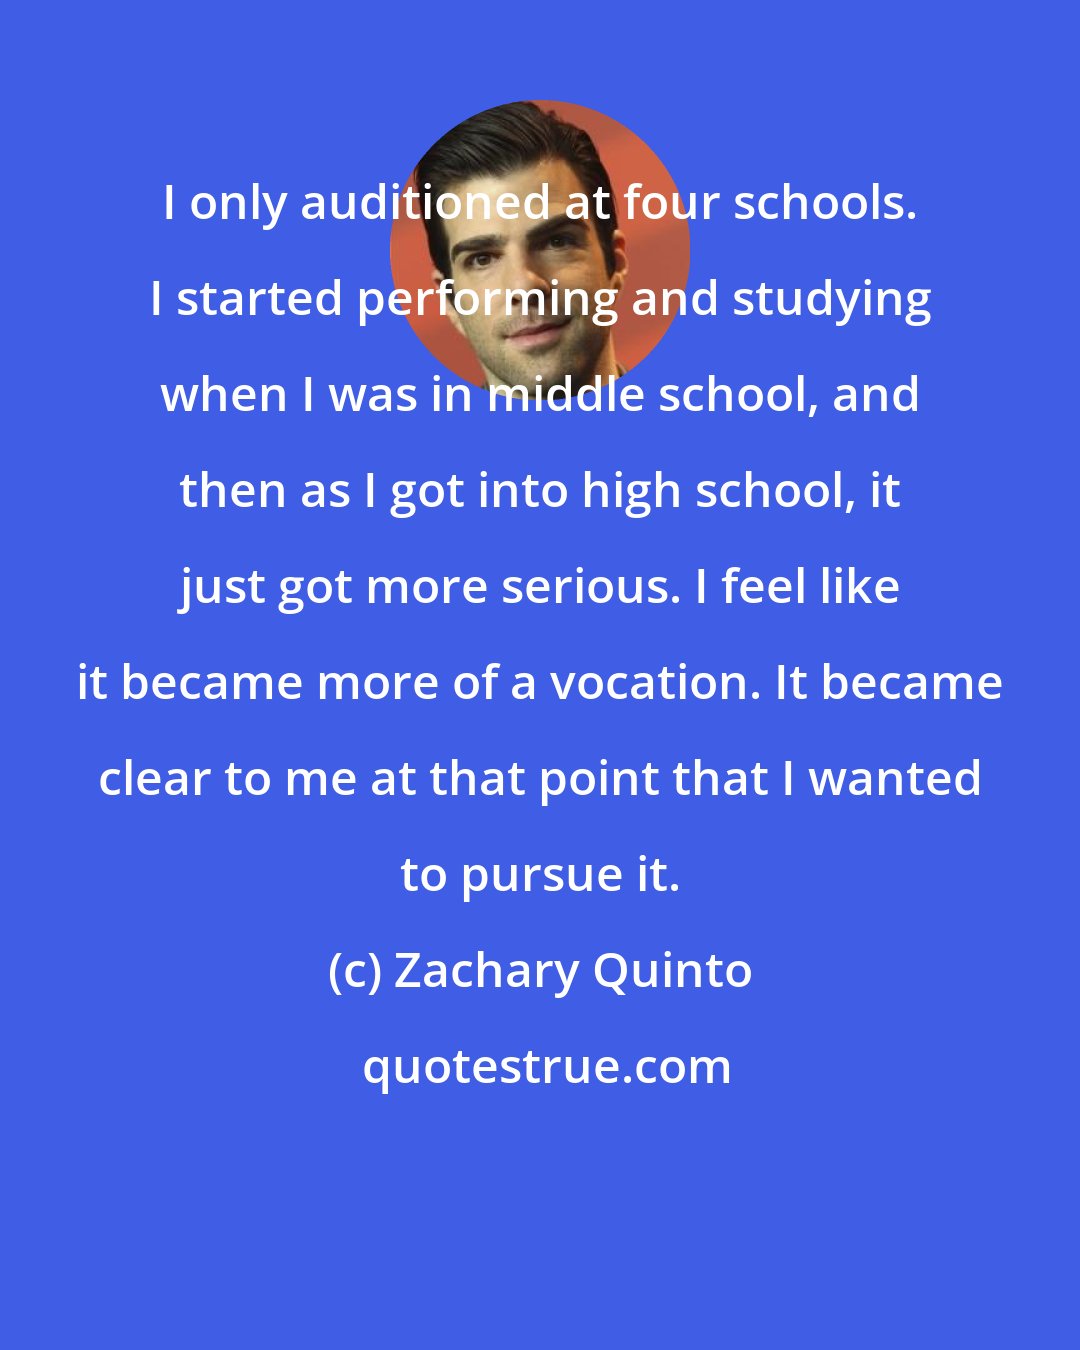 Zachary Quinto: I only auditioned at four schools. I started performing and studying when I was in middle school, and then as I got into high school, it just got more serious. I feel like it became more of a vocation. It became clear to me at that point that I wanted to pursue it.